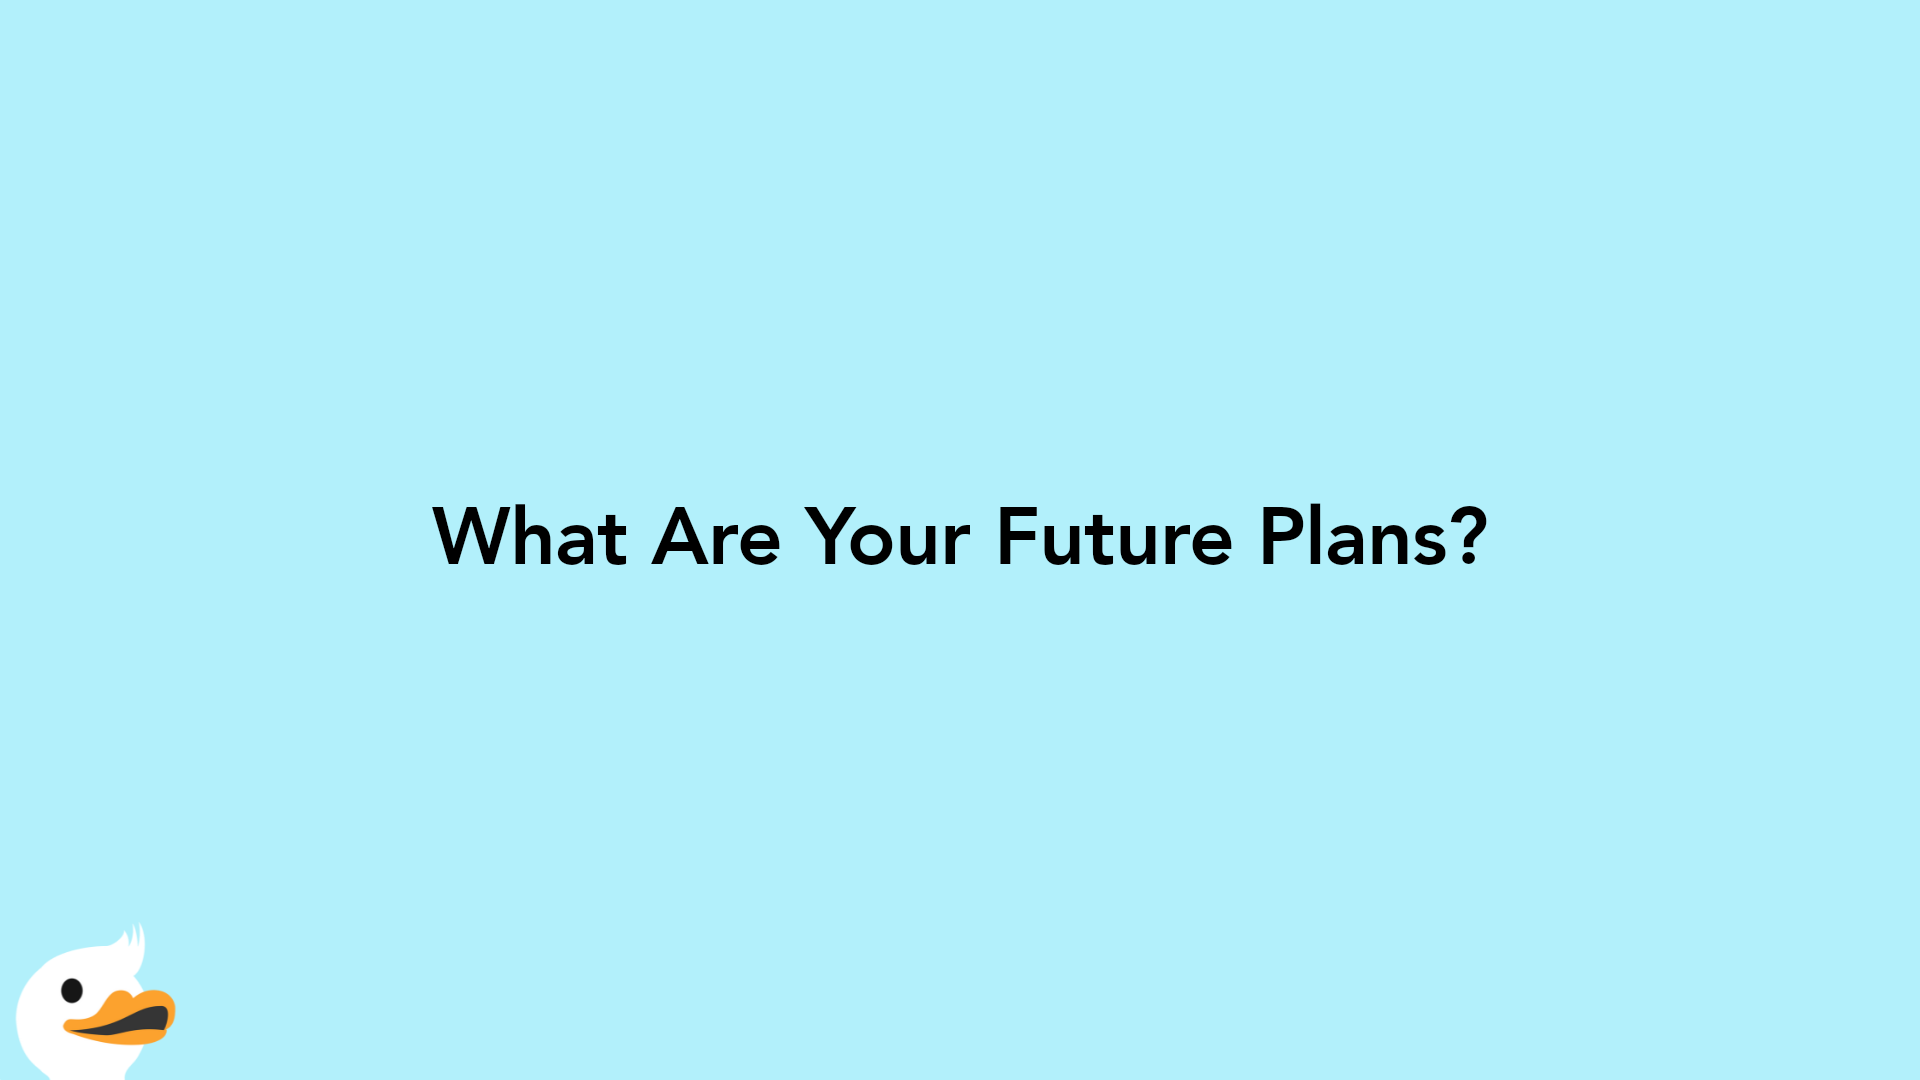 What Are Your Future Plans?